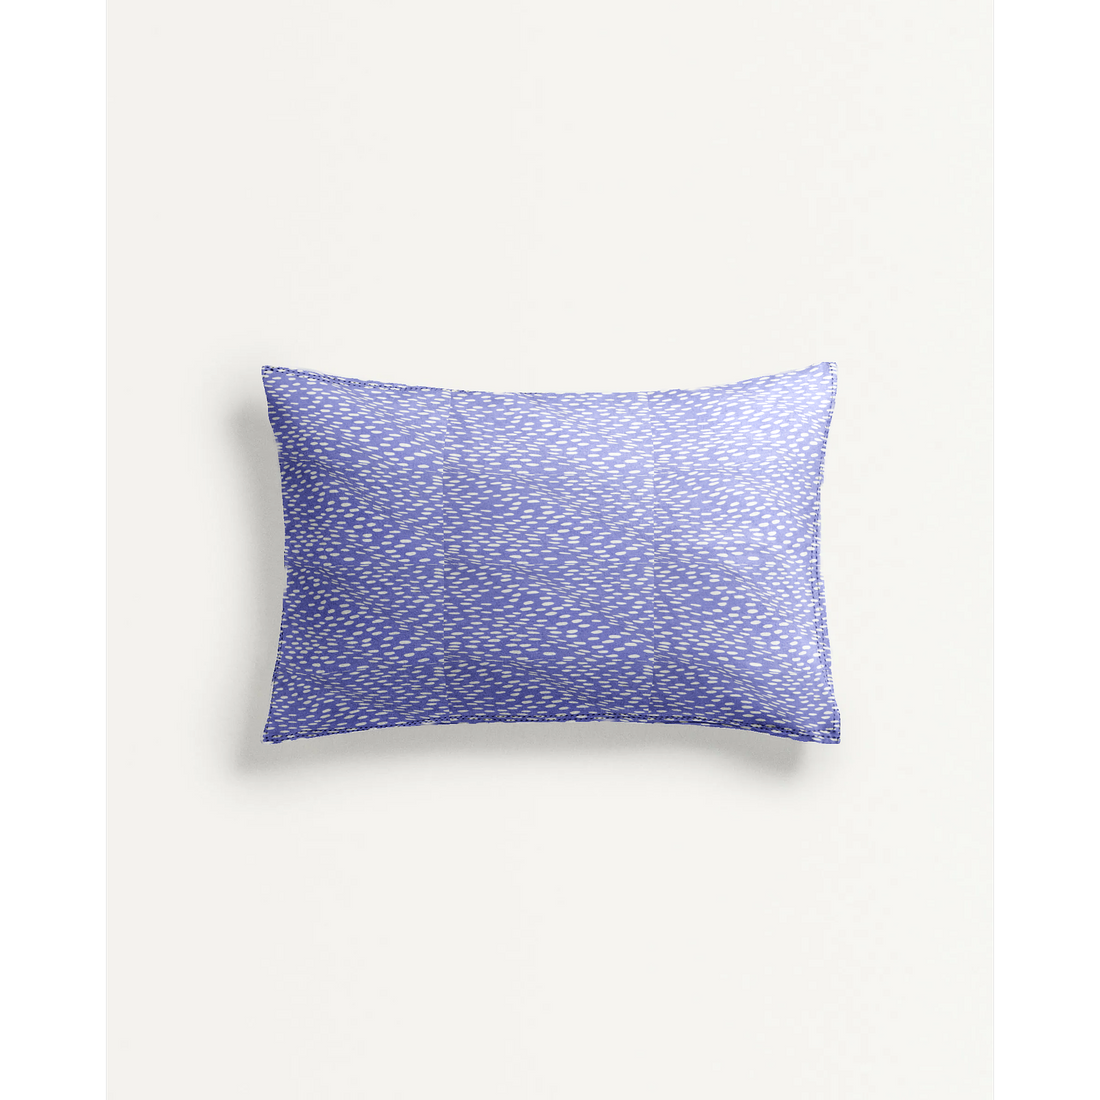 ‘Purple and White Spots’ Organic Baby Pillow Cover